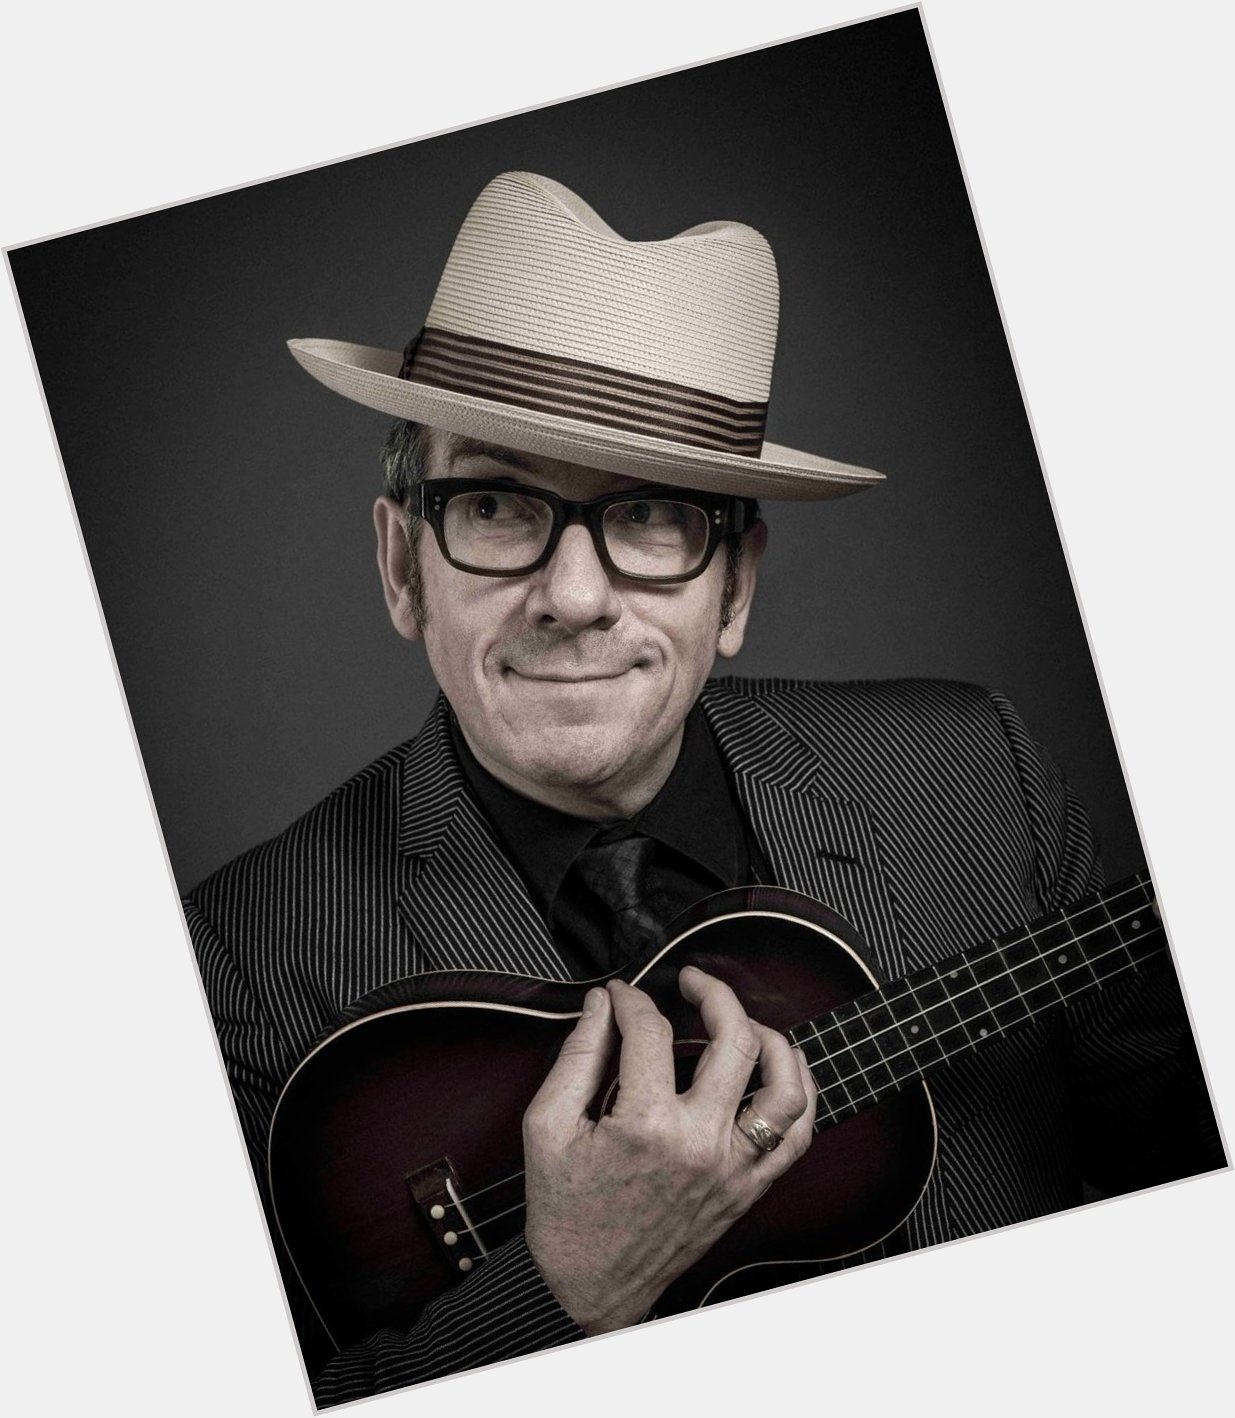 Happy Elvis Costello\s Birthday Day! Wishing you peace, love, and good health  